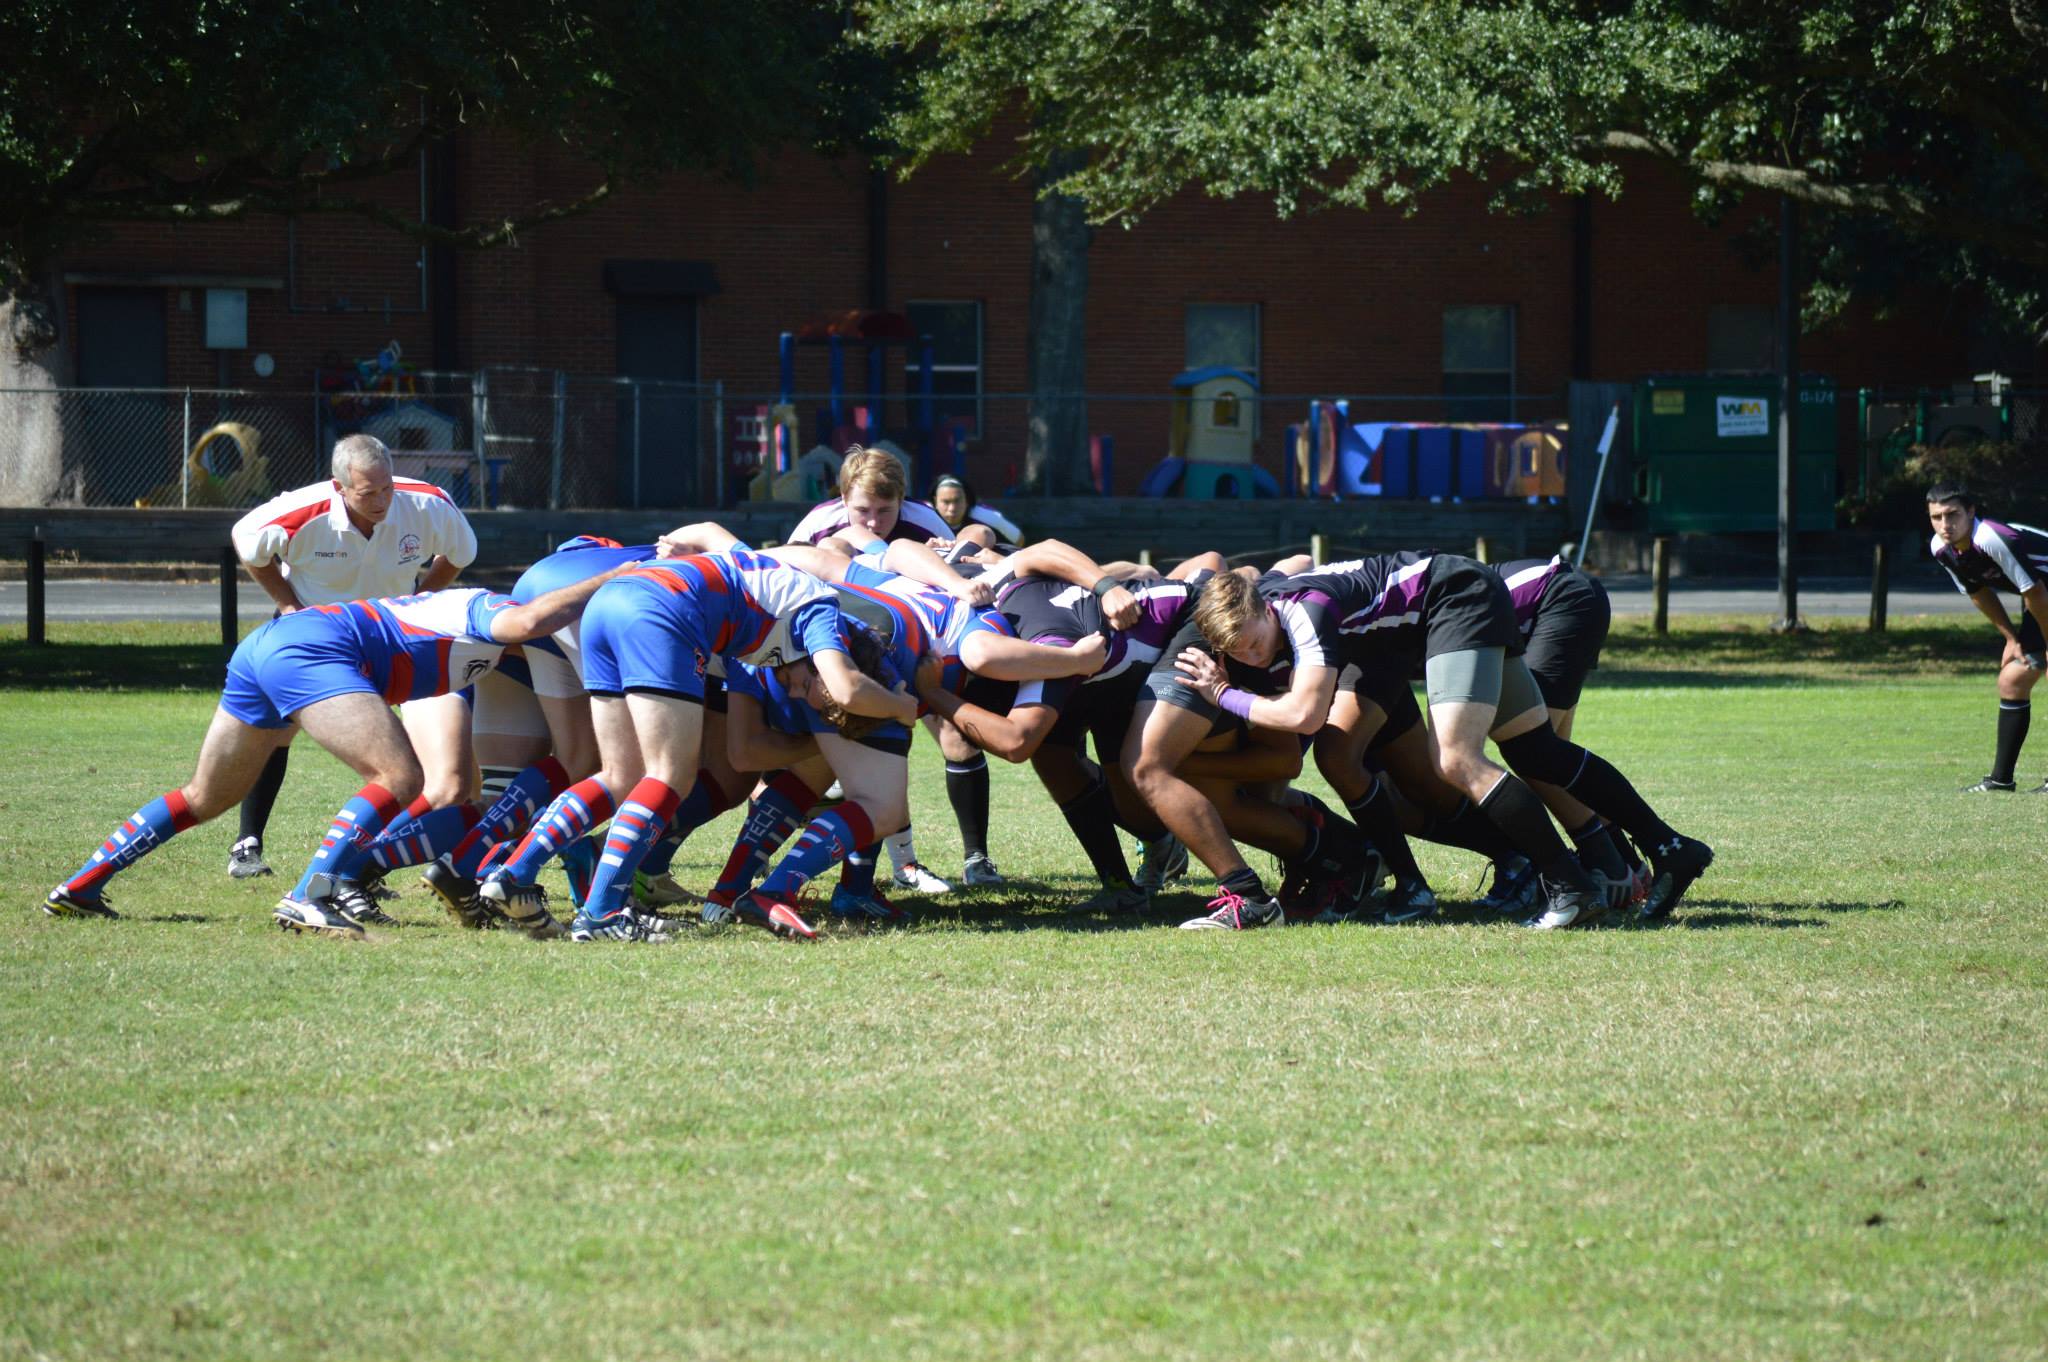 Pictures by Springhill Rugby Club